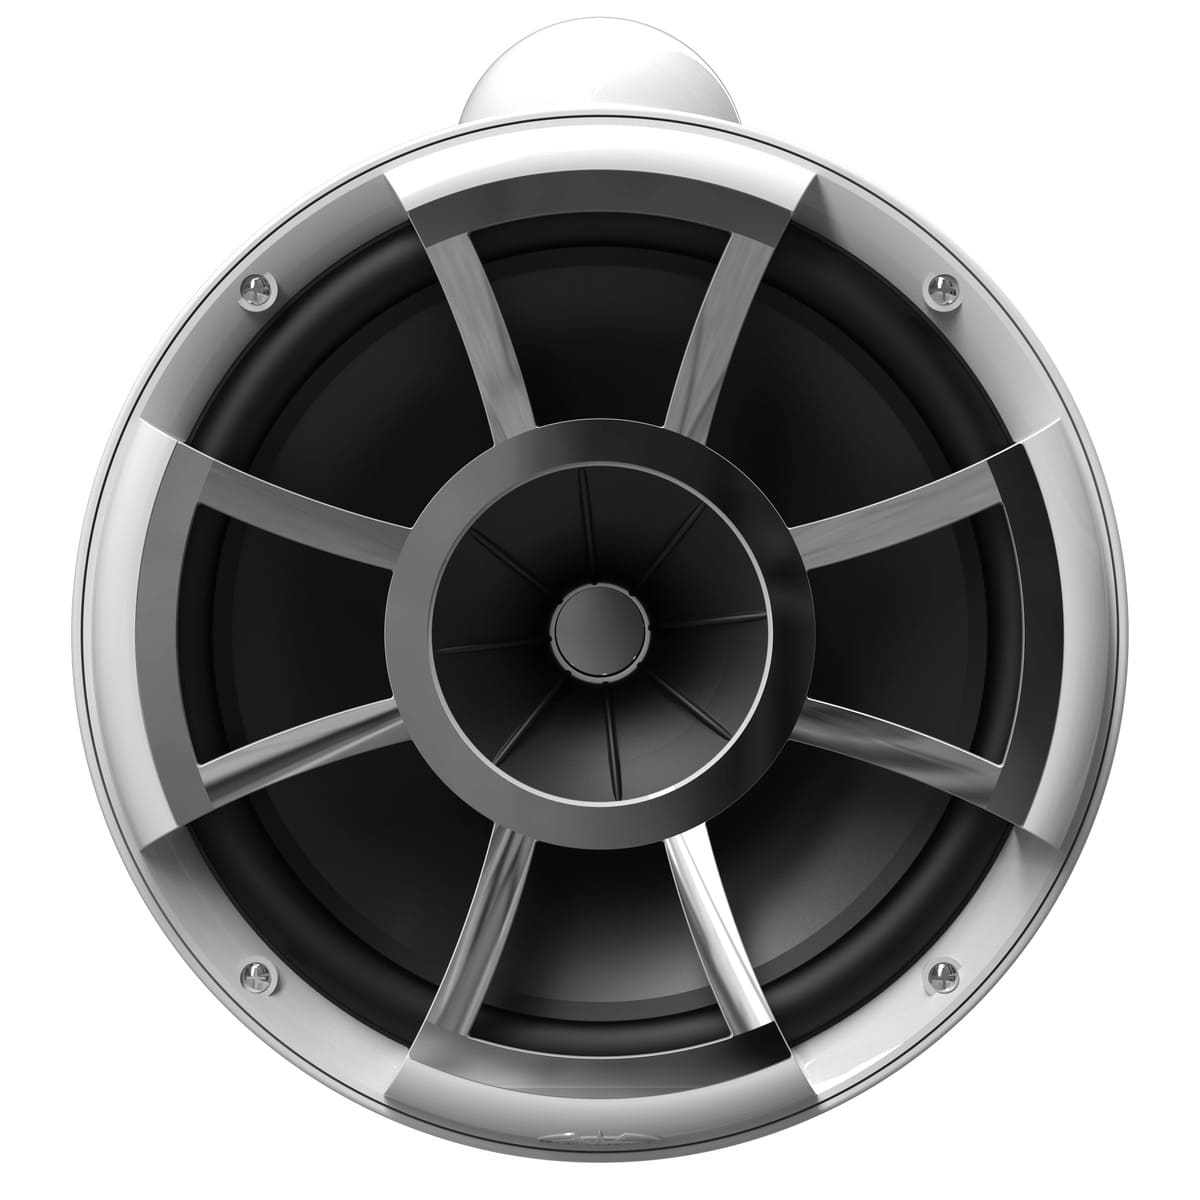 Wet Sounds Revolution Series 10" White Tower Speakers